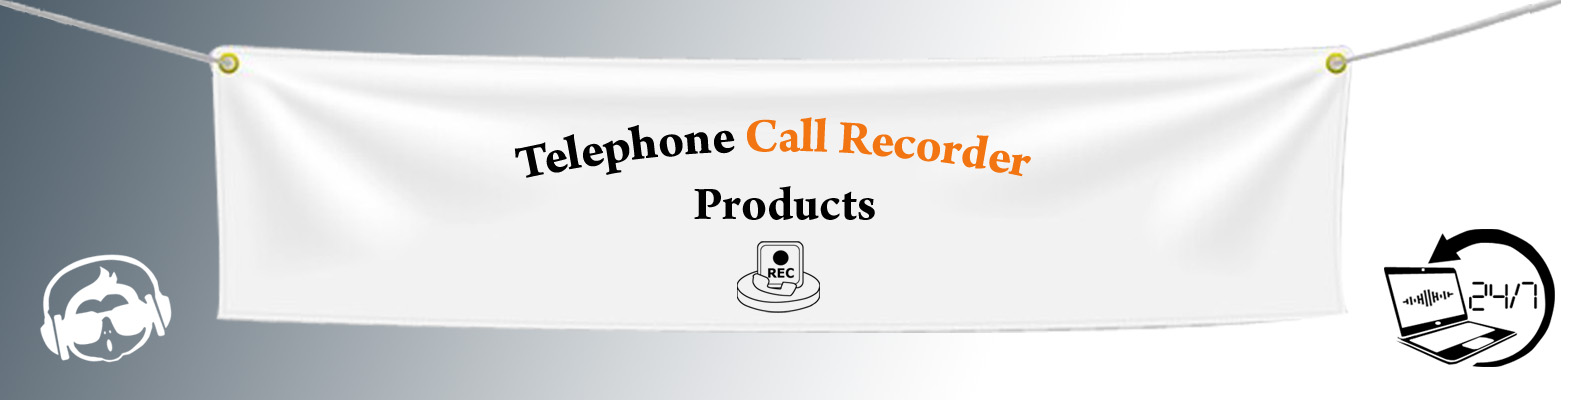 telephone call recorder products